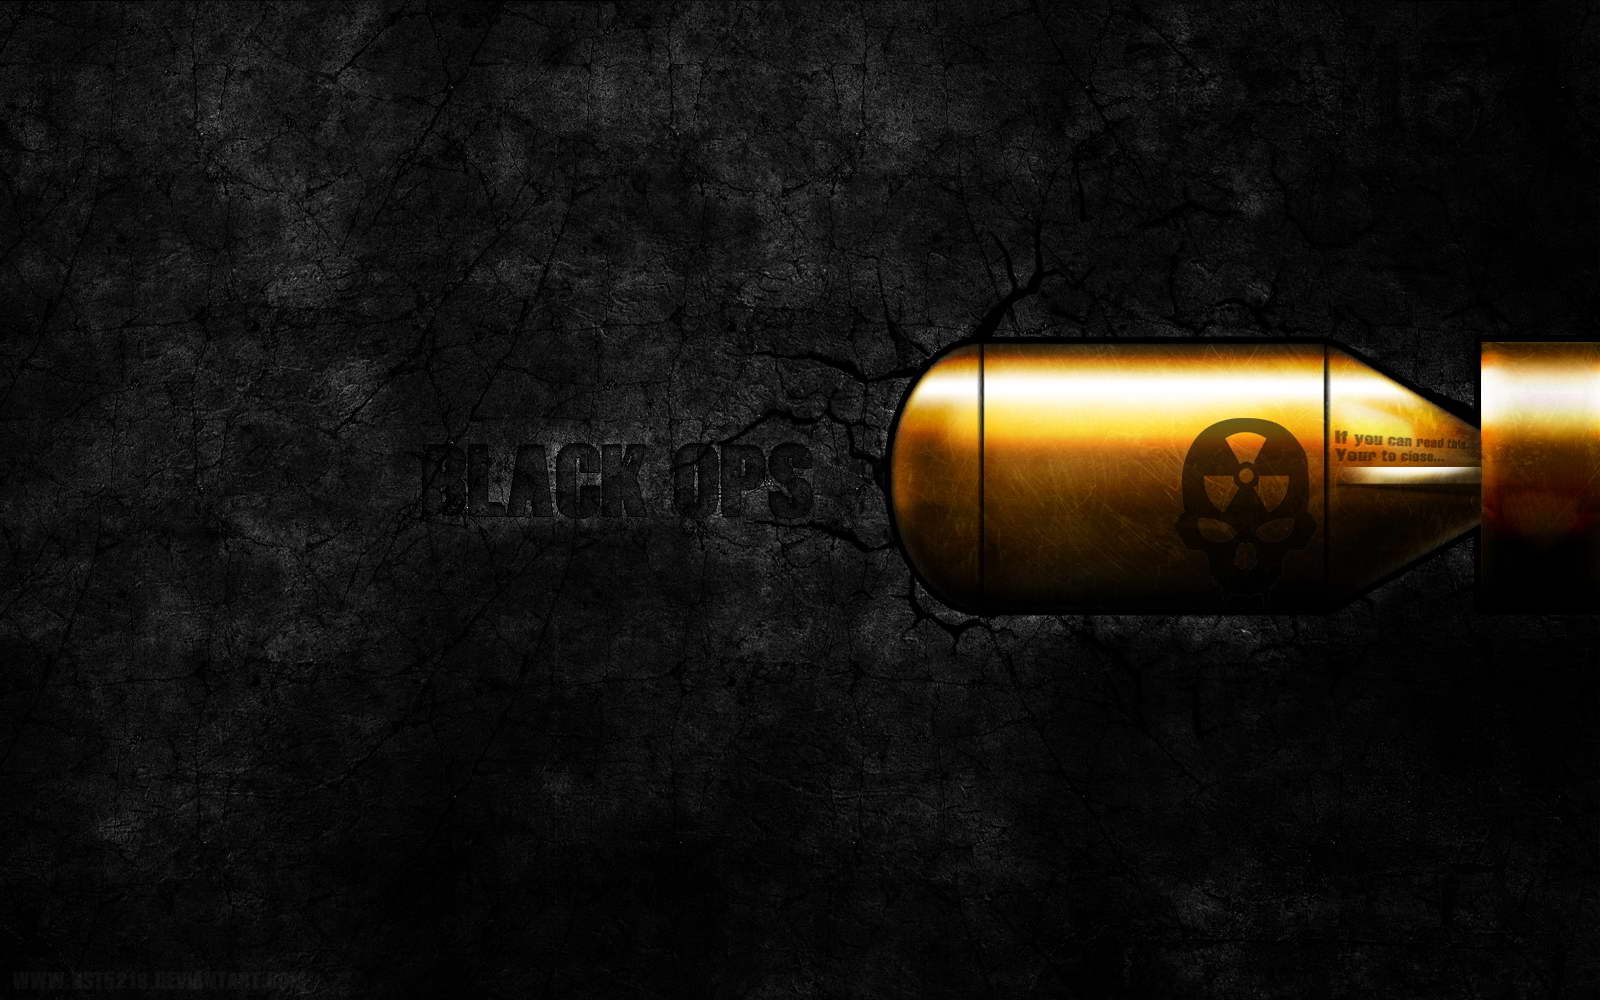 Black Ops 2 5012 Hd Wallpapers in Games   Imagescicom